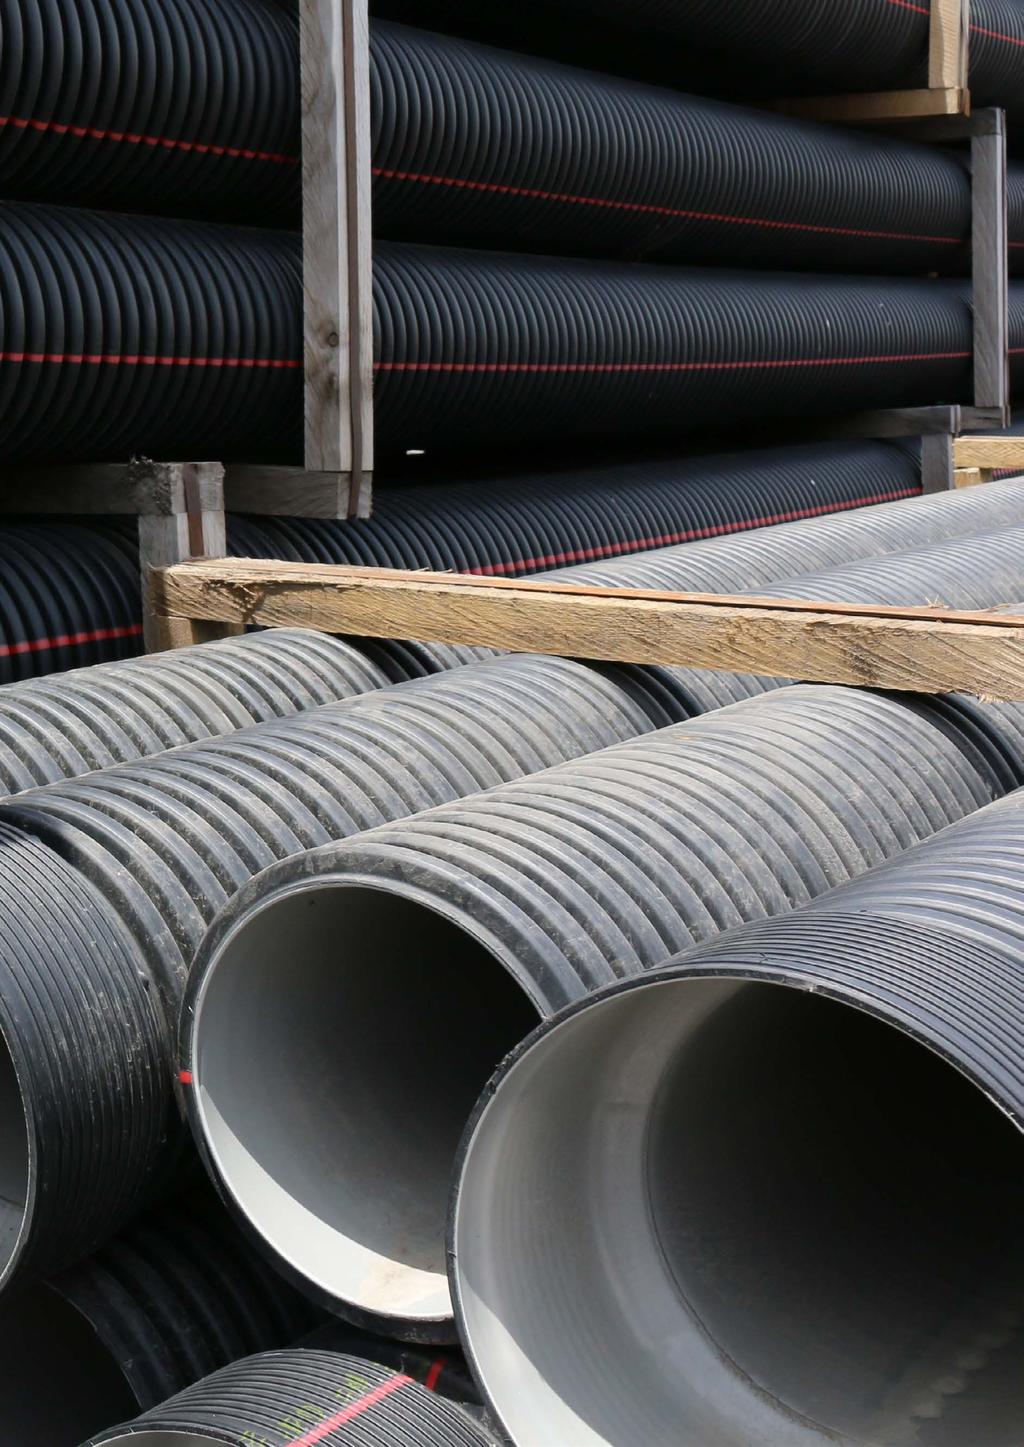 ABOUT WATERS & FARR Established in 1954, Waters & Farr is a leading manufacturer of polyethylene and polypropylene pipes for infrastructure and rural application.